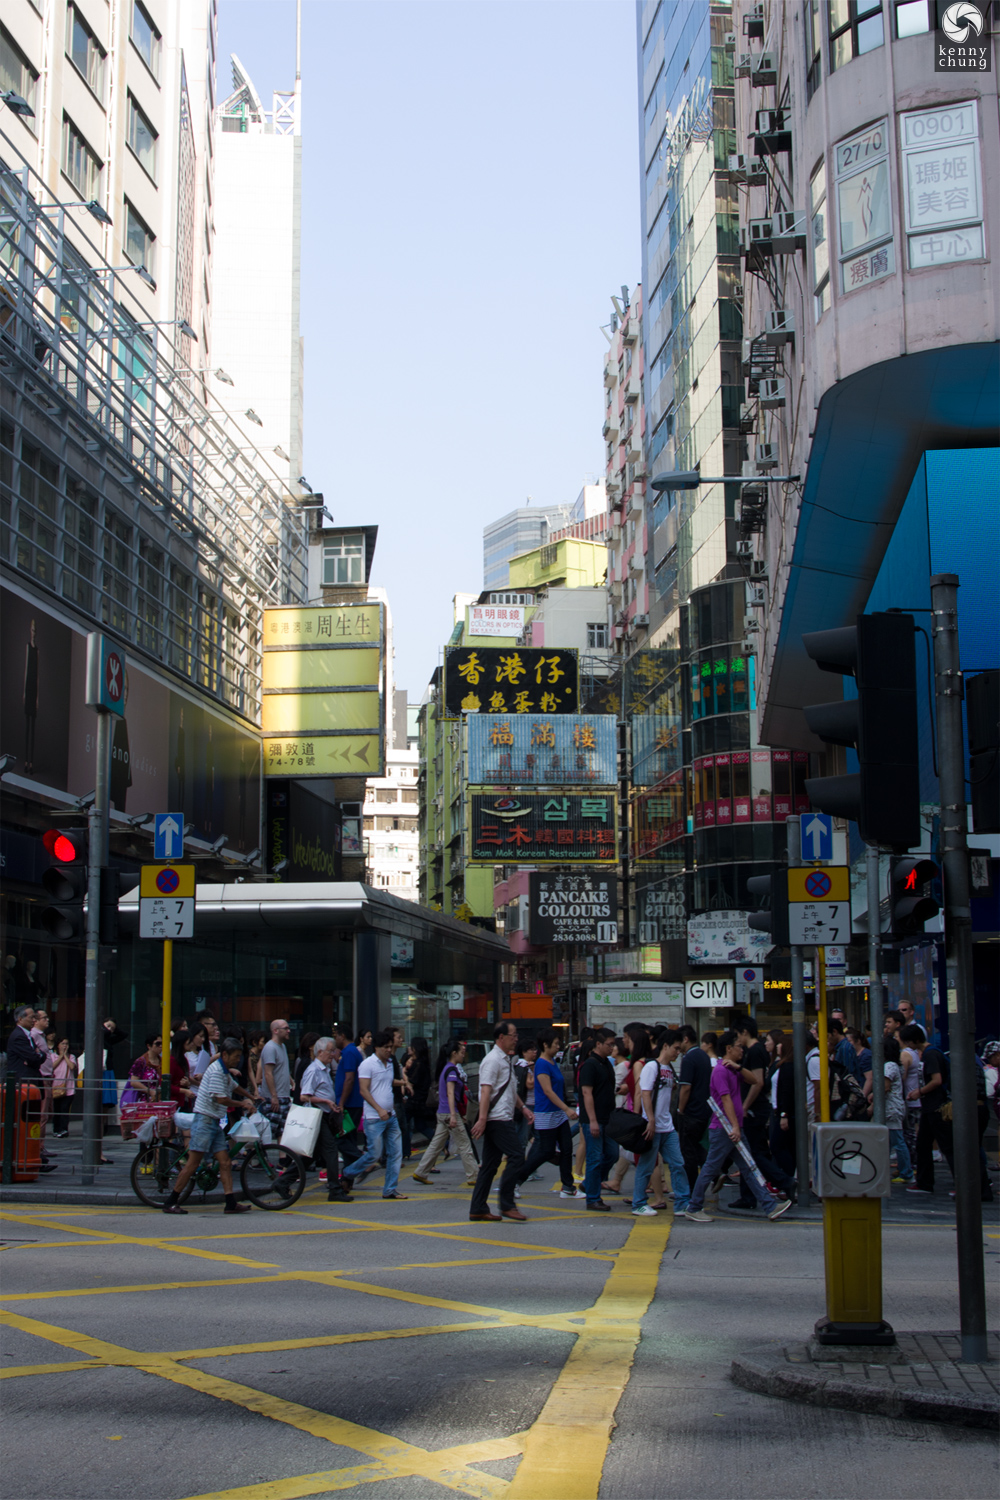 A busy intersection in Causeway Bay, Hong Kong